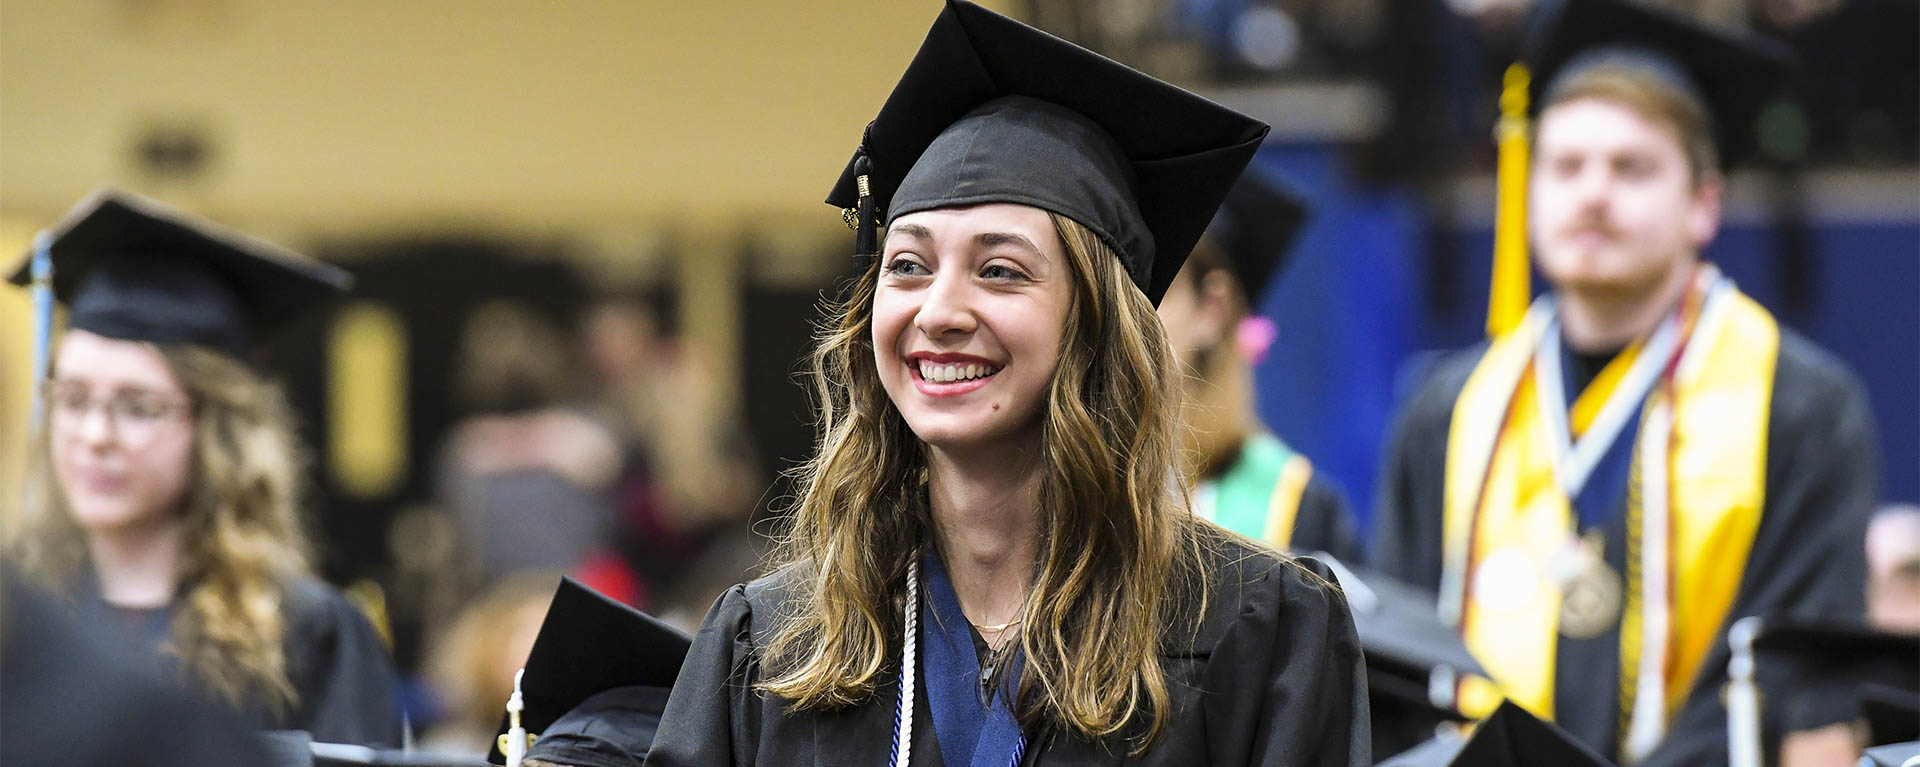 A student smiles while being recognized at a graduation ceremony.